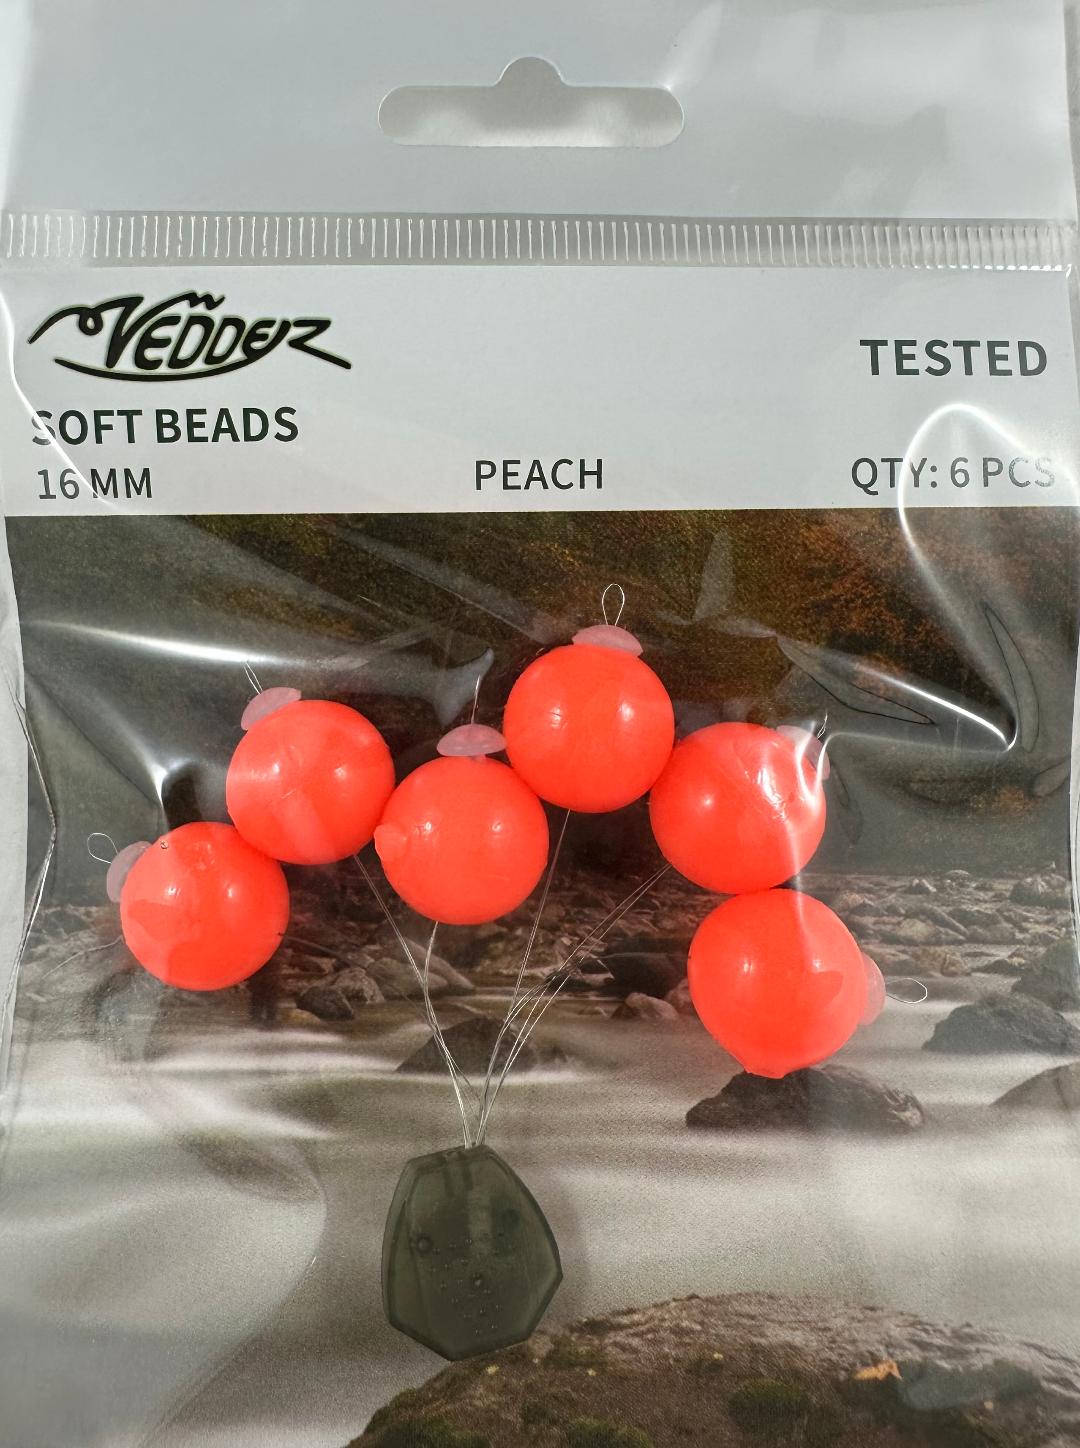 VSB-Peach 16 Vedder 16 mm Peach Soft Beads x 6 with Stoppers x 6